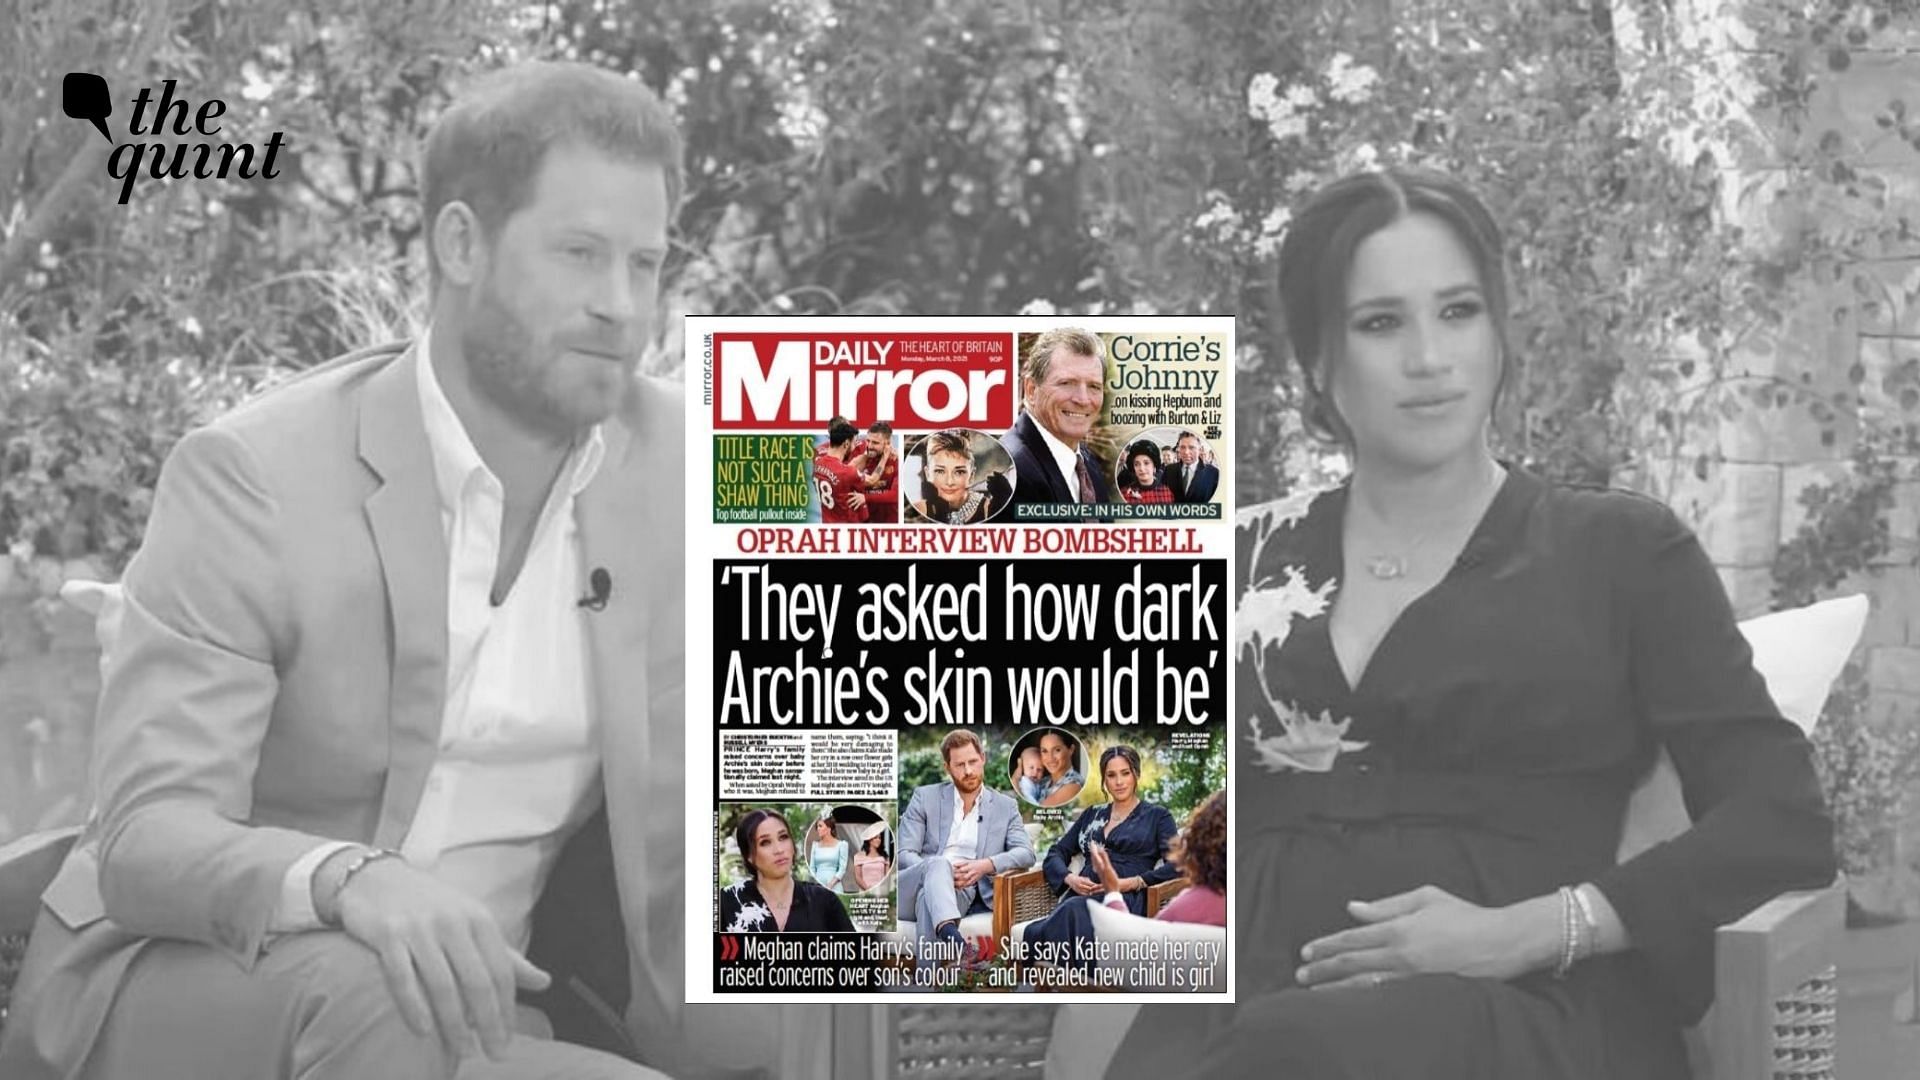 The couple made claims that garnered international headlines and praise from several sections of the society, but not all were kind to the Duke and the Duchess of Sussex.